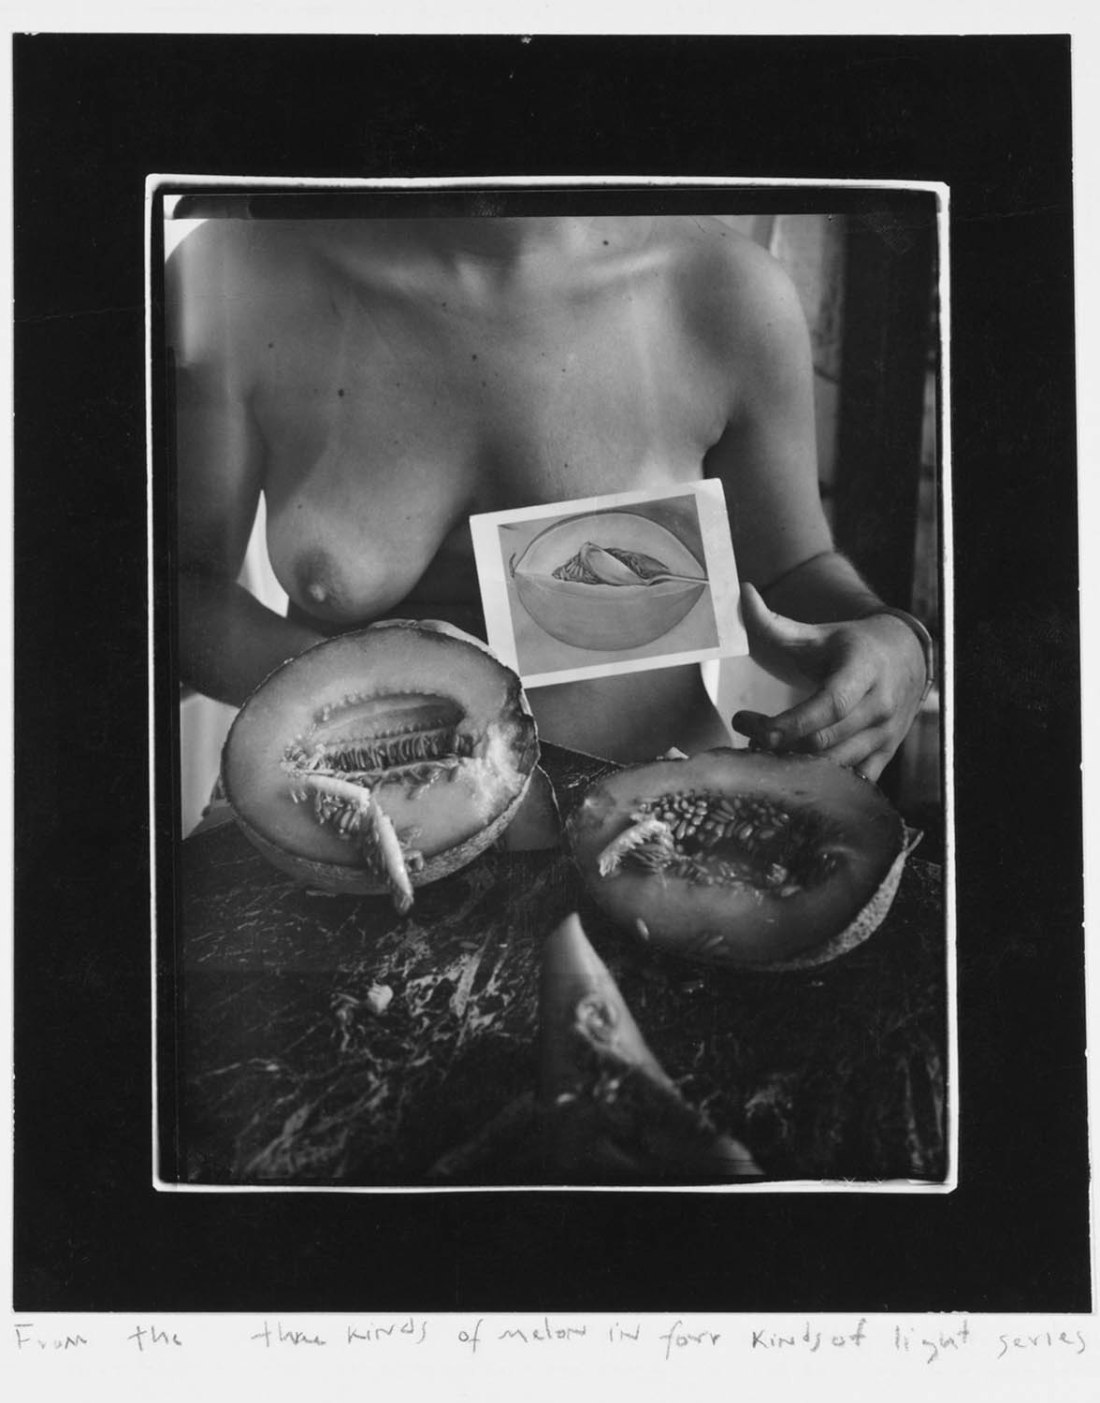 Francesca Woodman :: "From the three kinds of melon in four kinds of light series", 1975-1977. | Victoria Miro Gallery